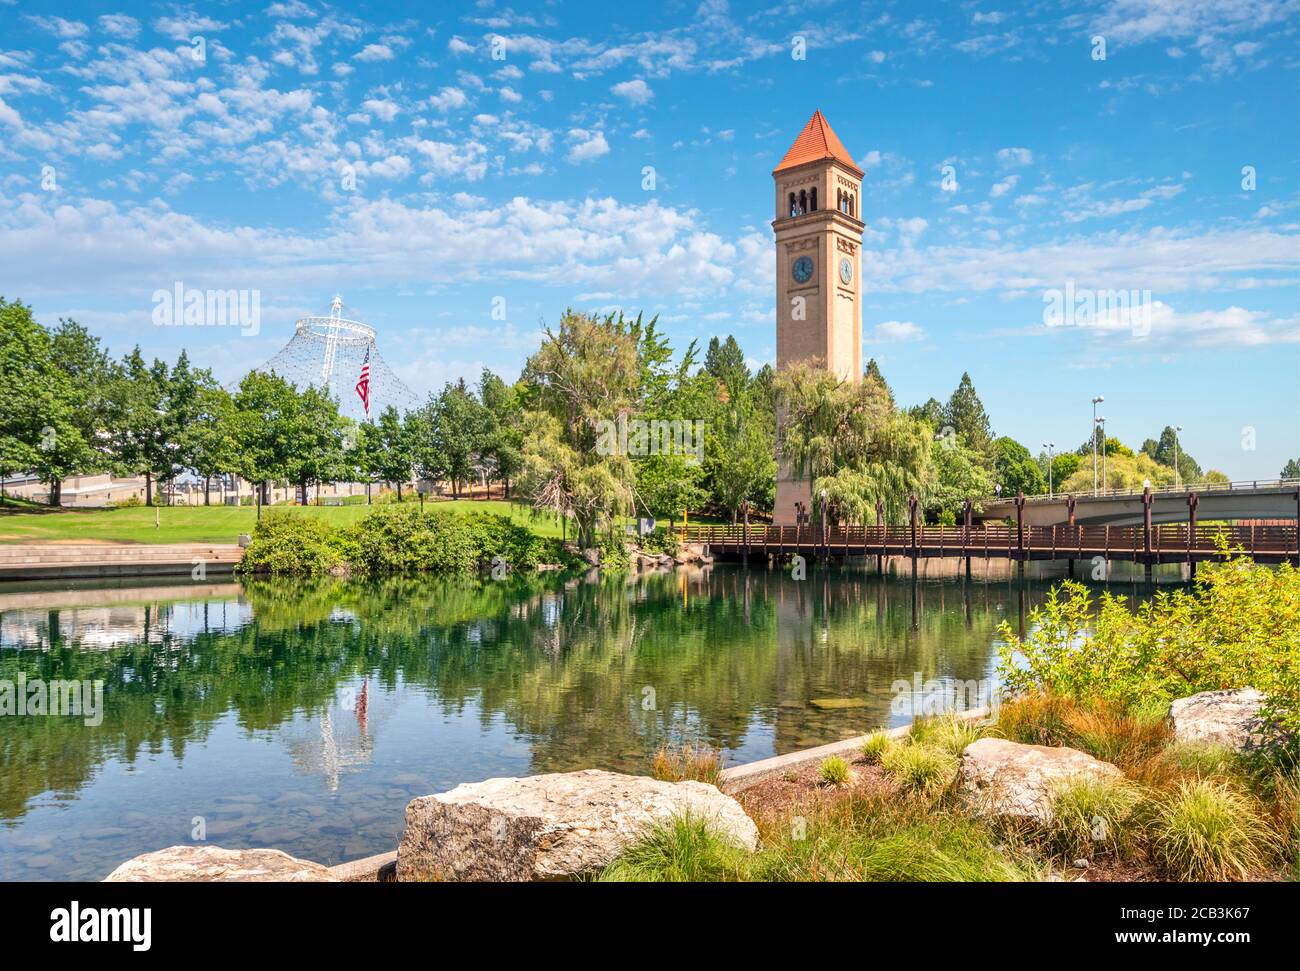 Riverfront Park, along the Spokane River in downtown Spokane, Washington, USA, with the Pavilion and clock tower in view. Stock Photo